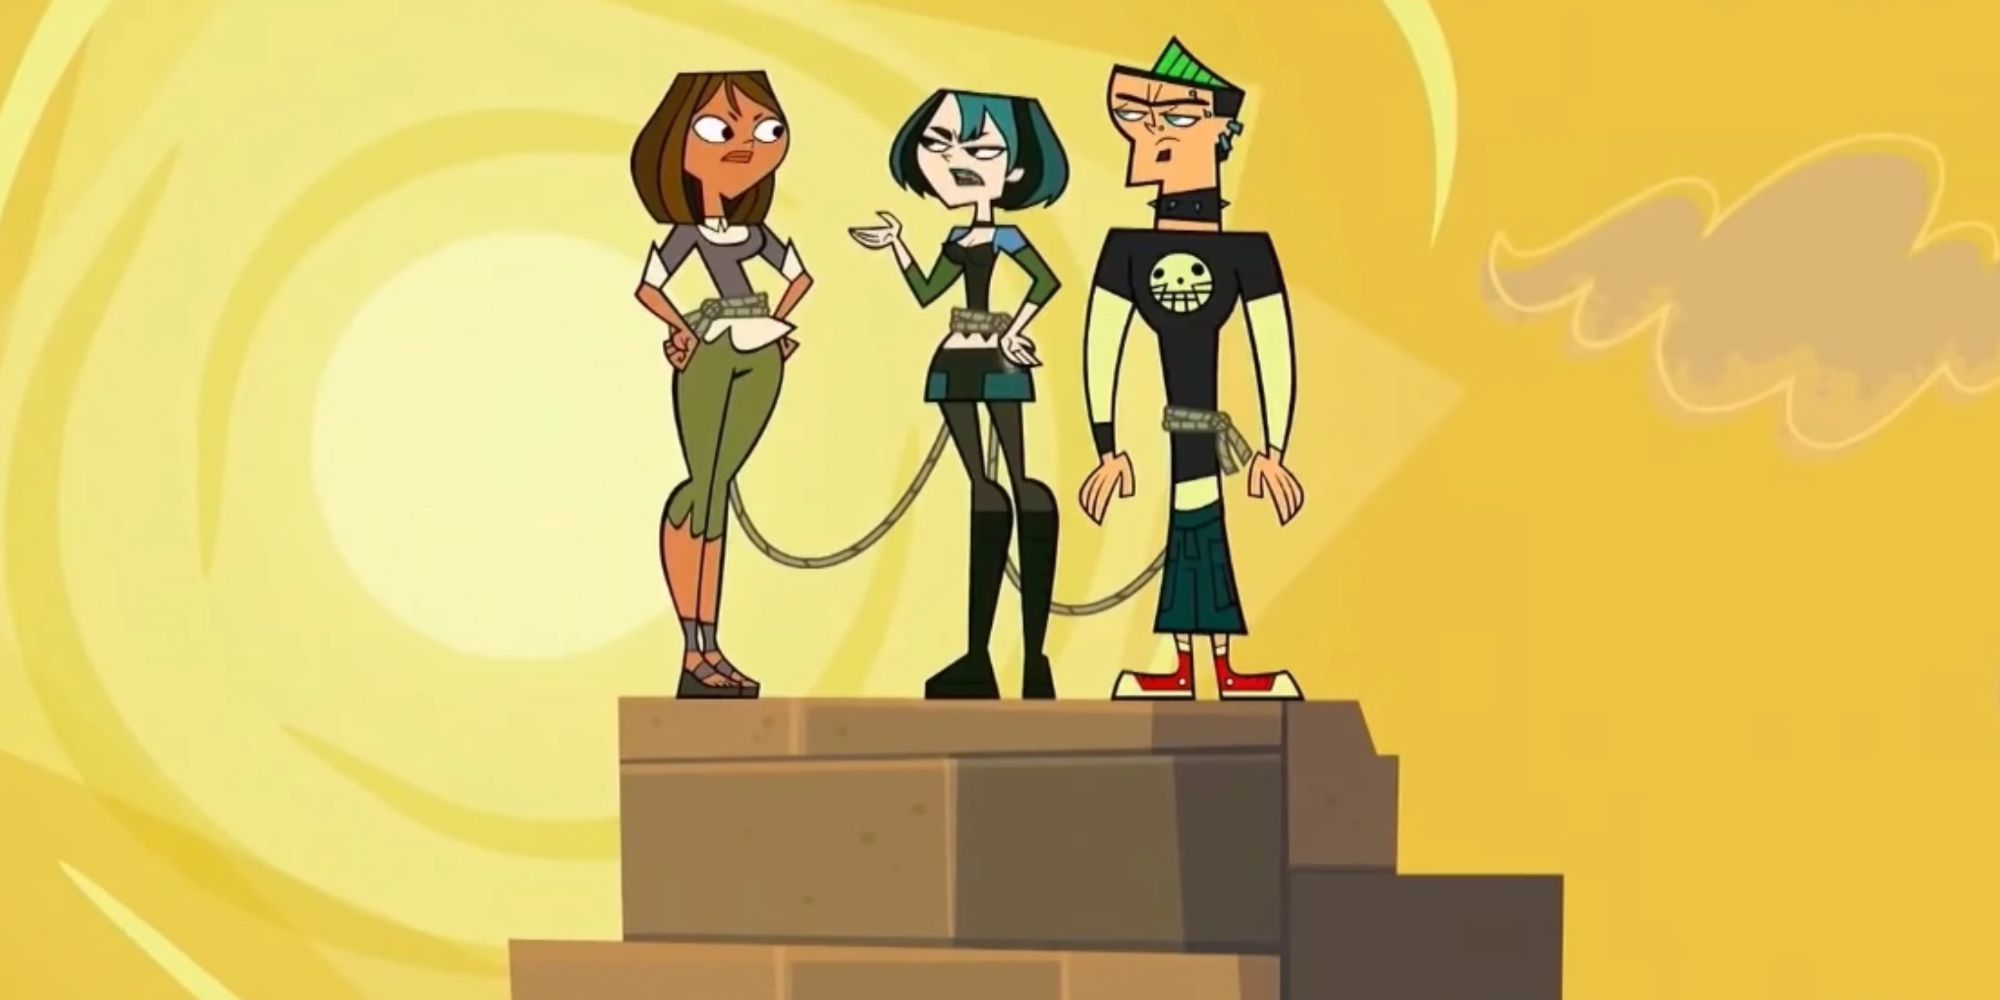 Courtney Duncan and Gwen Total Drama